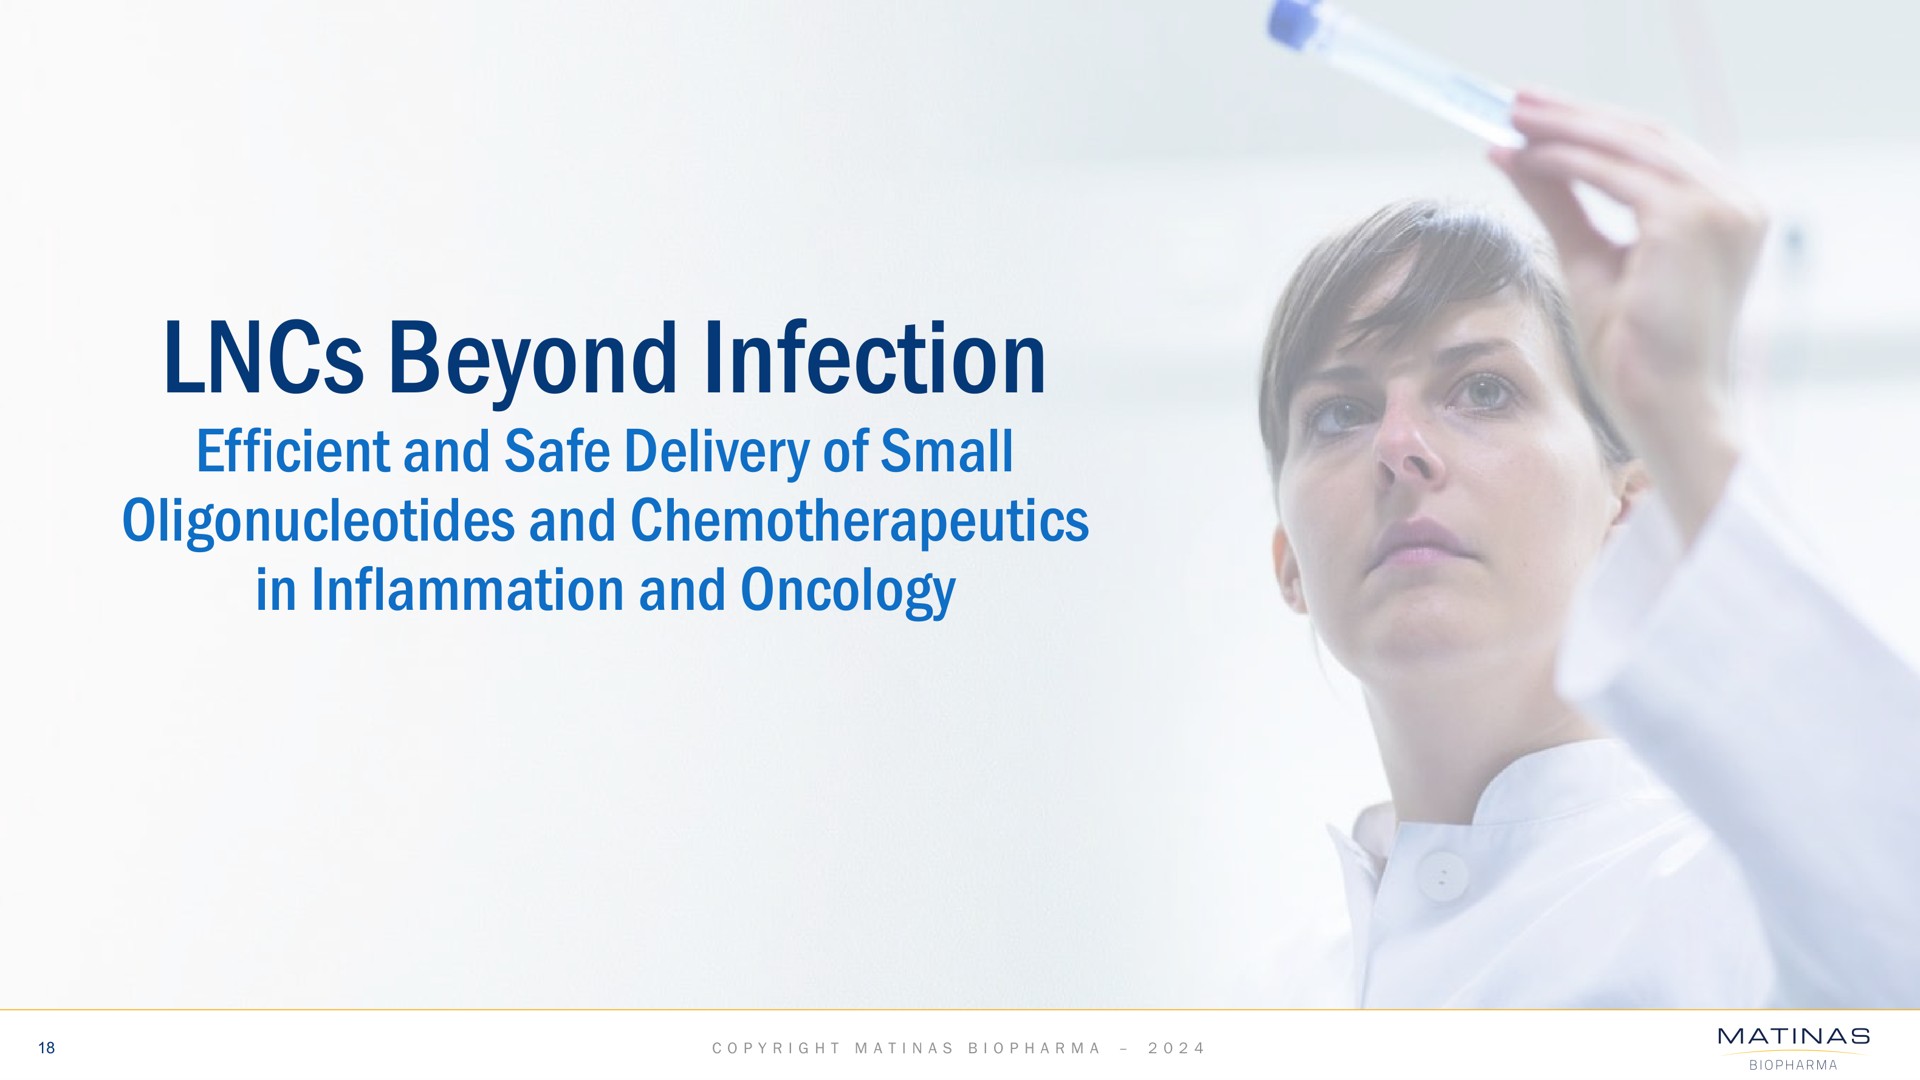 beyond infection efficient and safe delivery of small and chemotherapeutics in inflammation and oncology | Matinas BioPharma